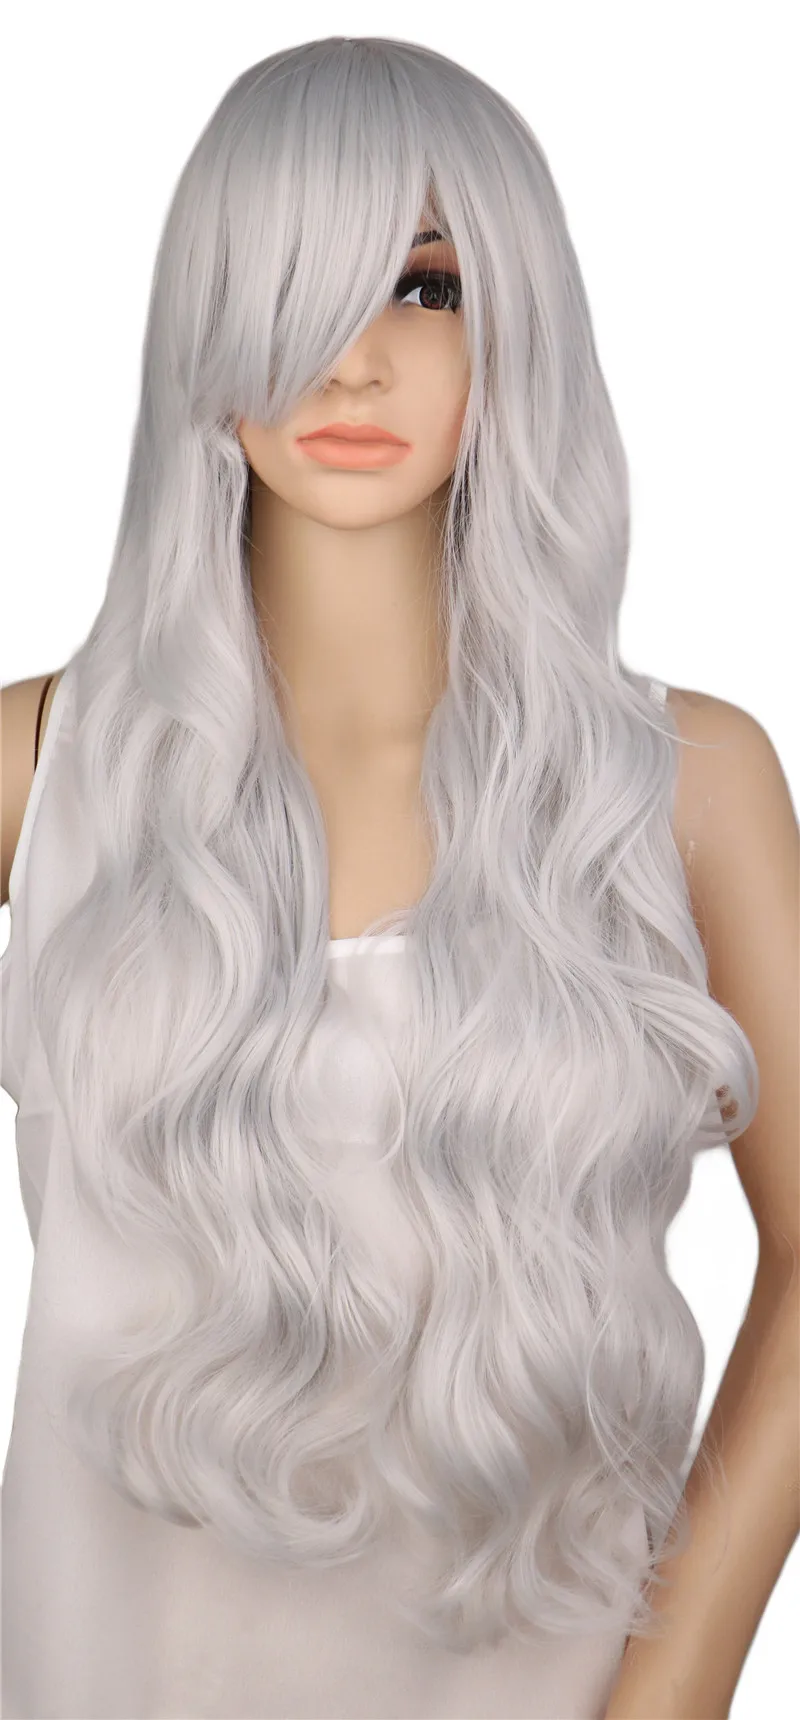 QQXCAIW Long Curly Cosplay Wig Costume Party Red Pink Sliver Gray Blonde Black 70 Cm High Temperature Synthetic Hair Wigs 18